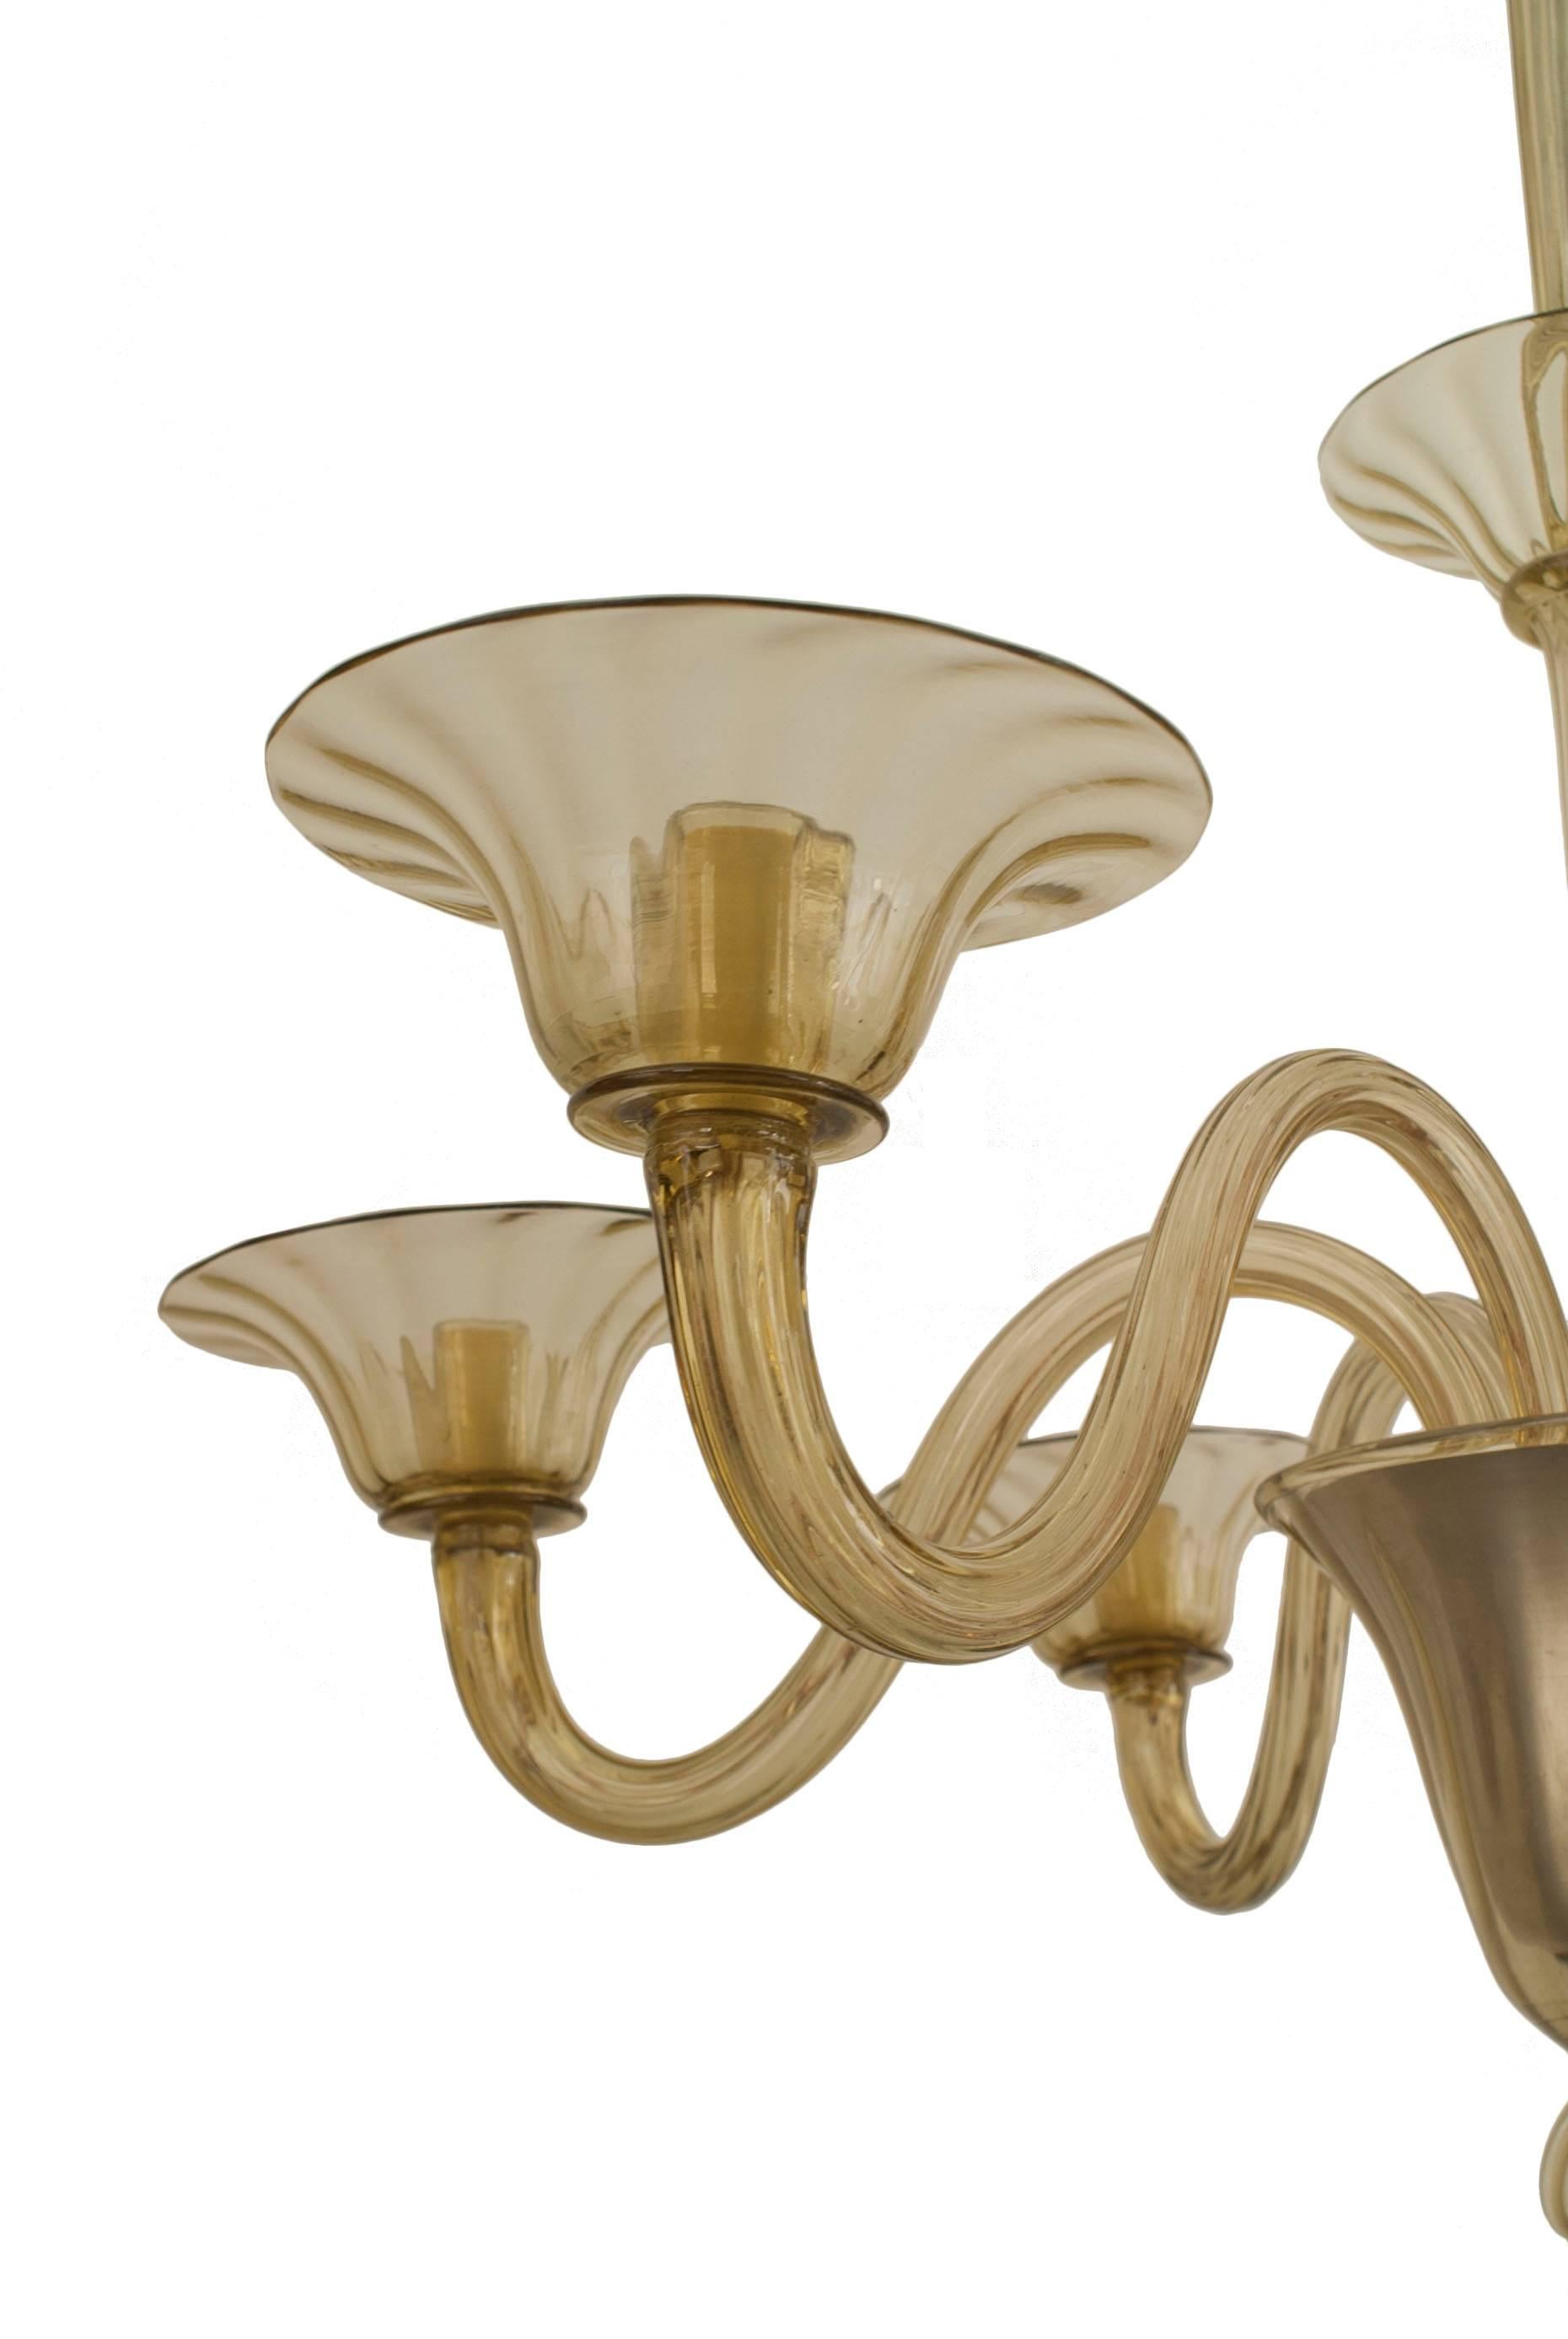 Italian Venetian Murano chandelier with 6 smoky tinted scroll arms supporting flared fluted shades and emanating from a 3 tiered center post with a finial bottom.
